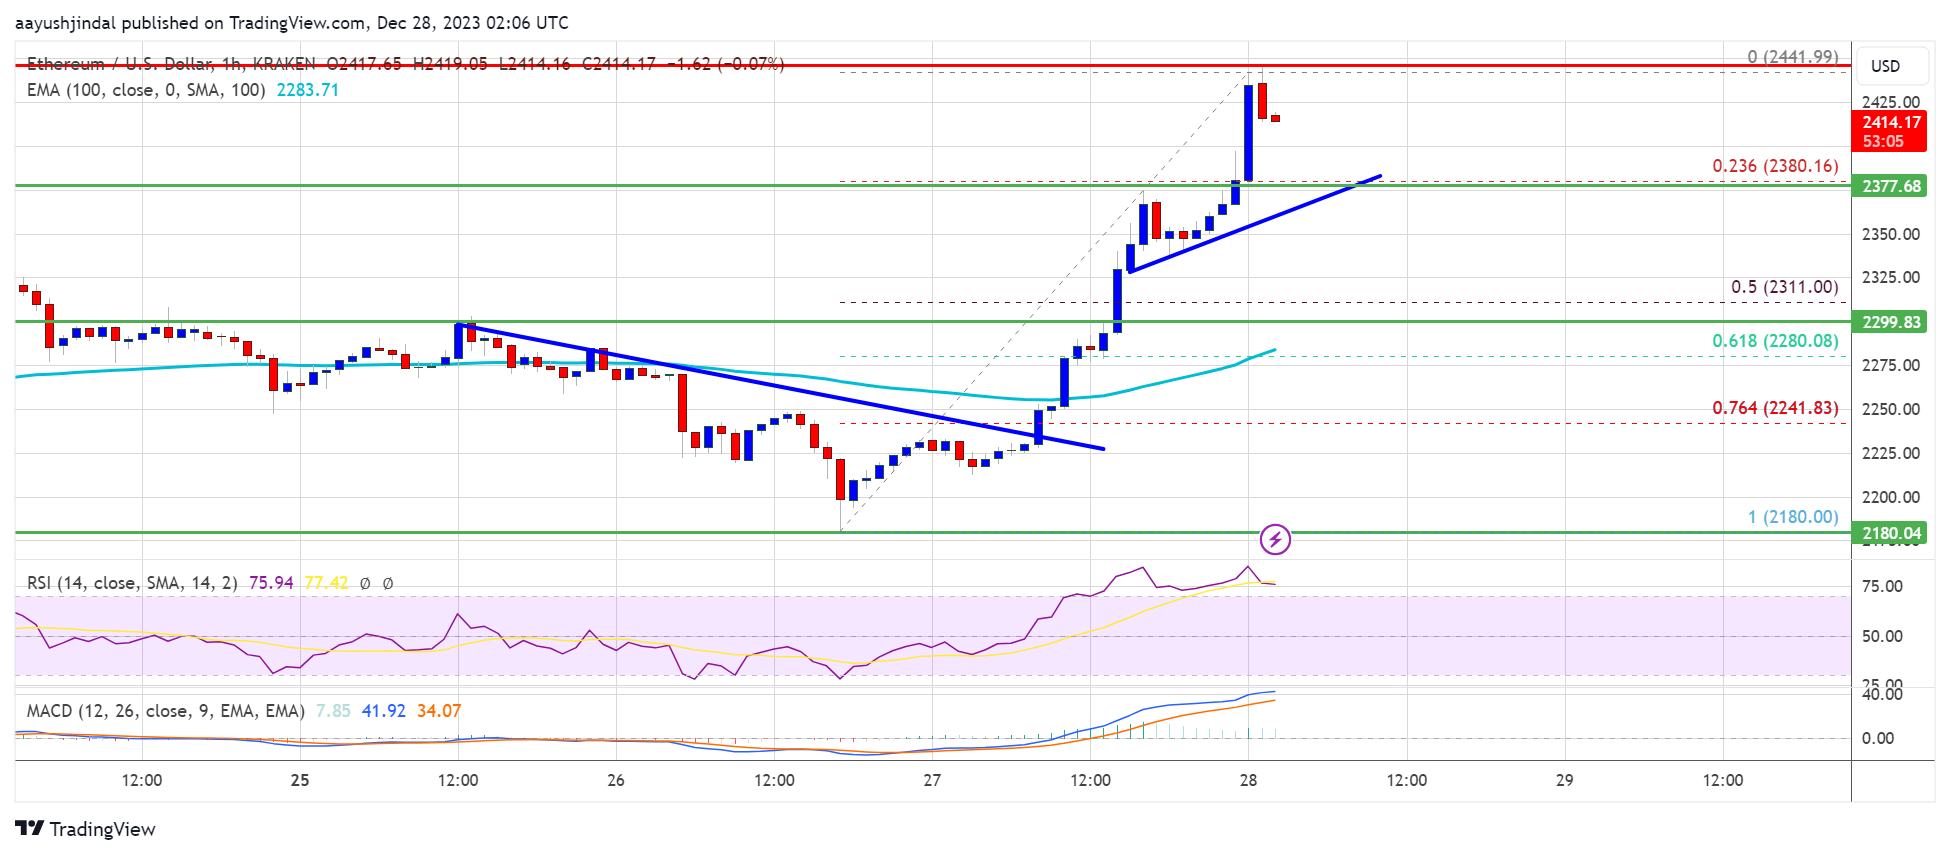 Ethereum Price Surges 5% As ETH Bulls Finally Take Over, $2,550 Next?